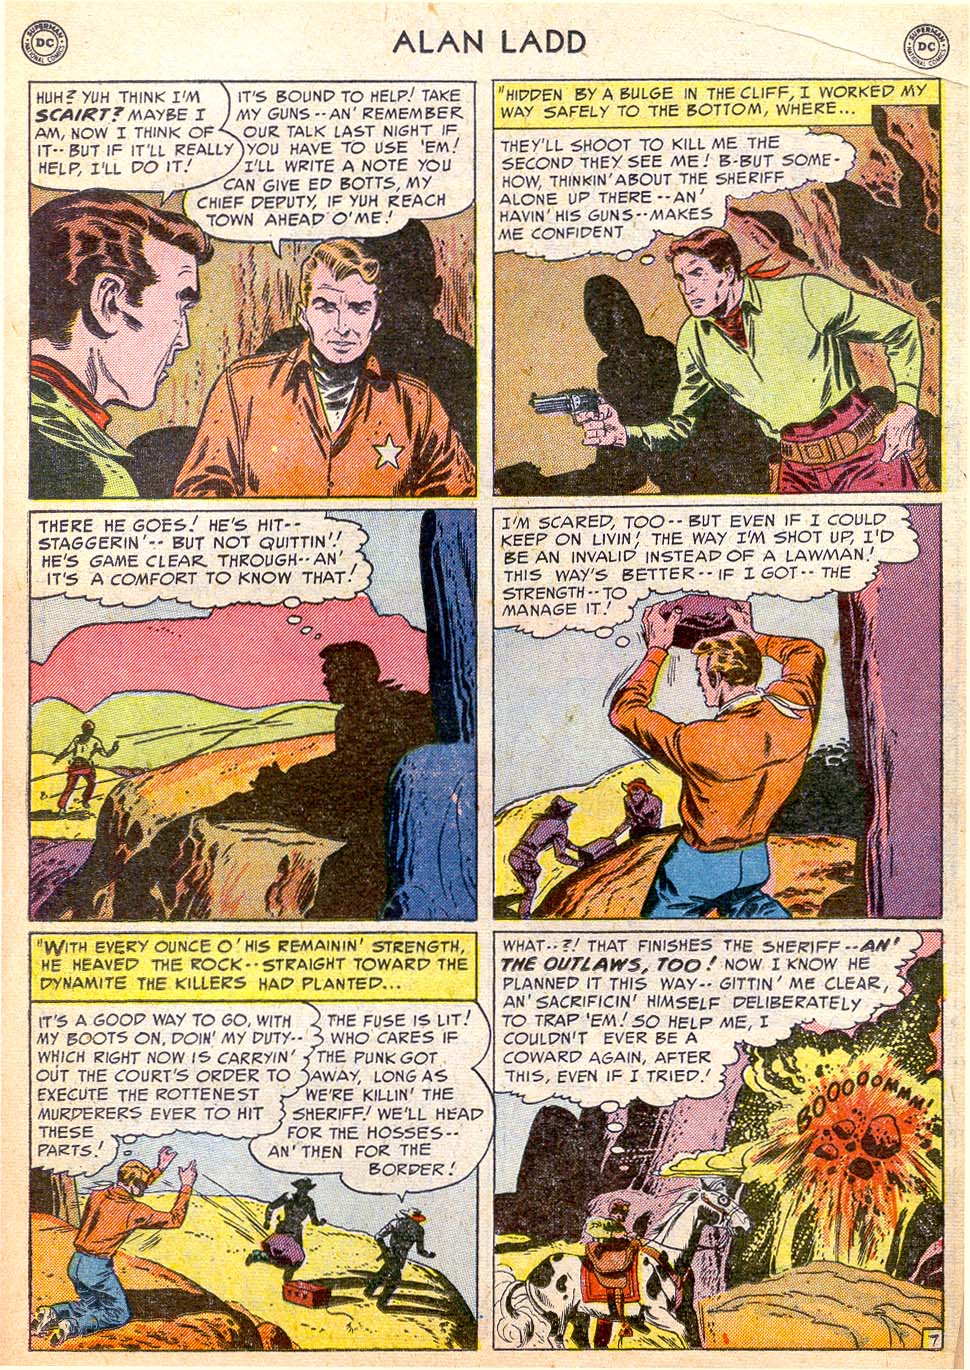 Read online Adventures of Alan Ladd comic -  Issue #9 - 23